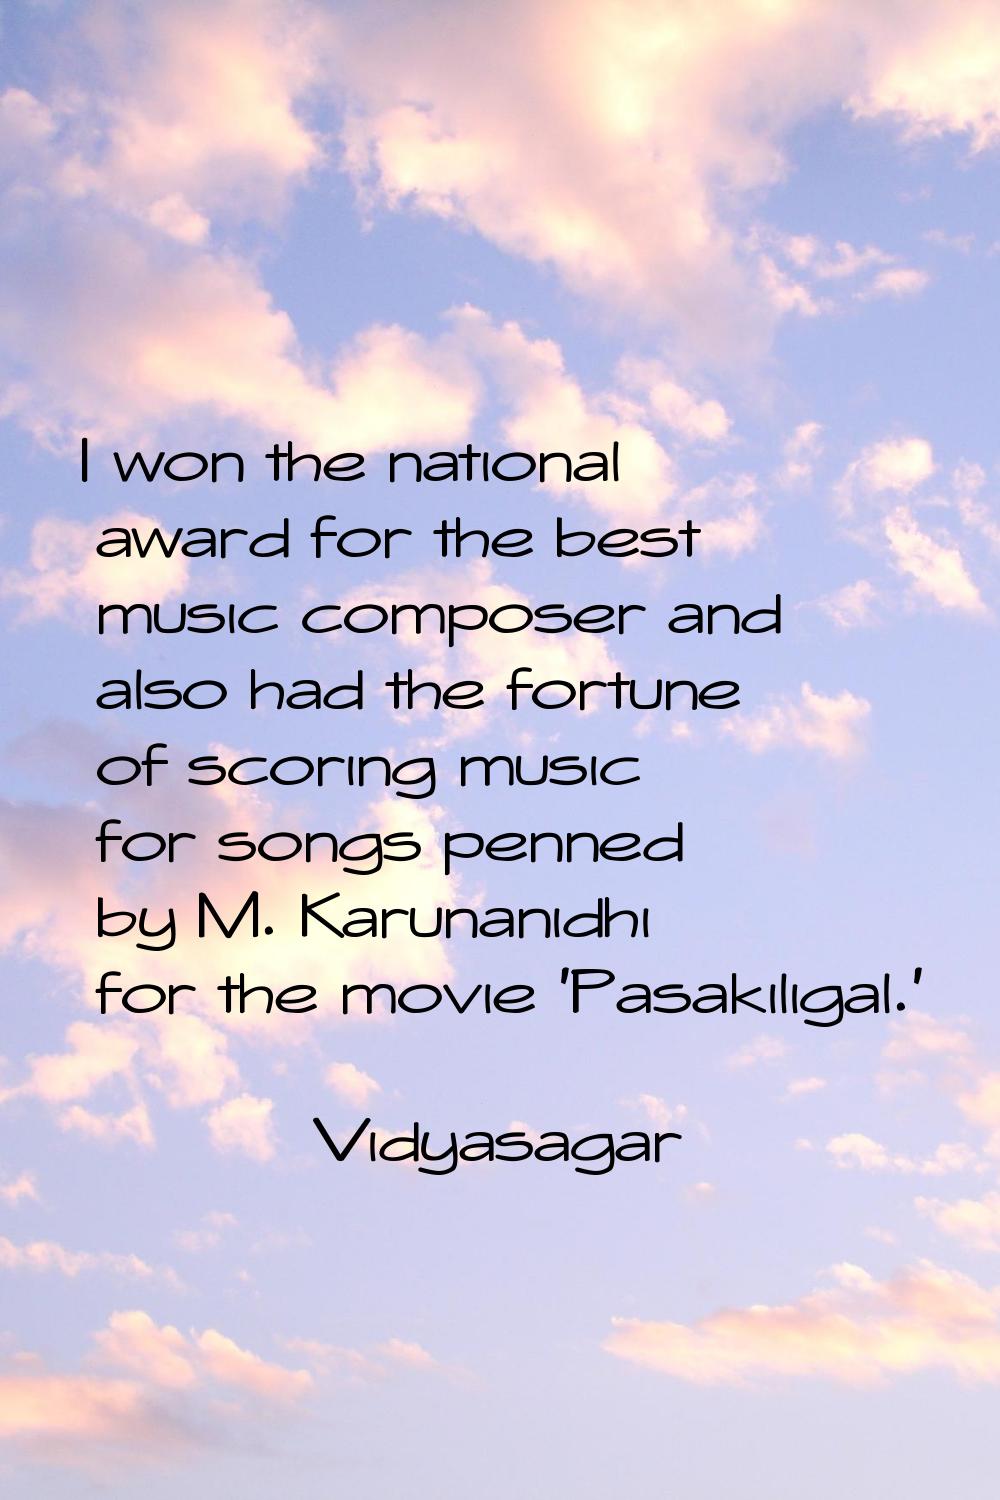 I won the national award for the best music composer and also had the fortune of scoring music for 